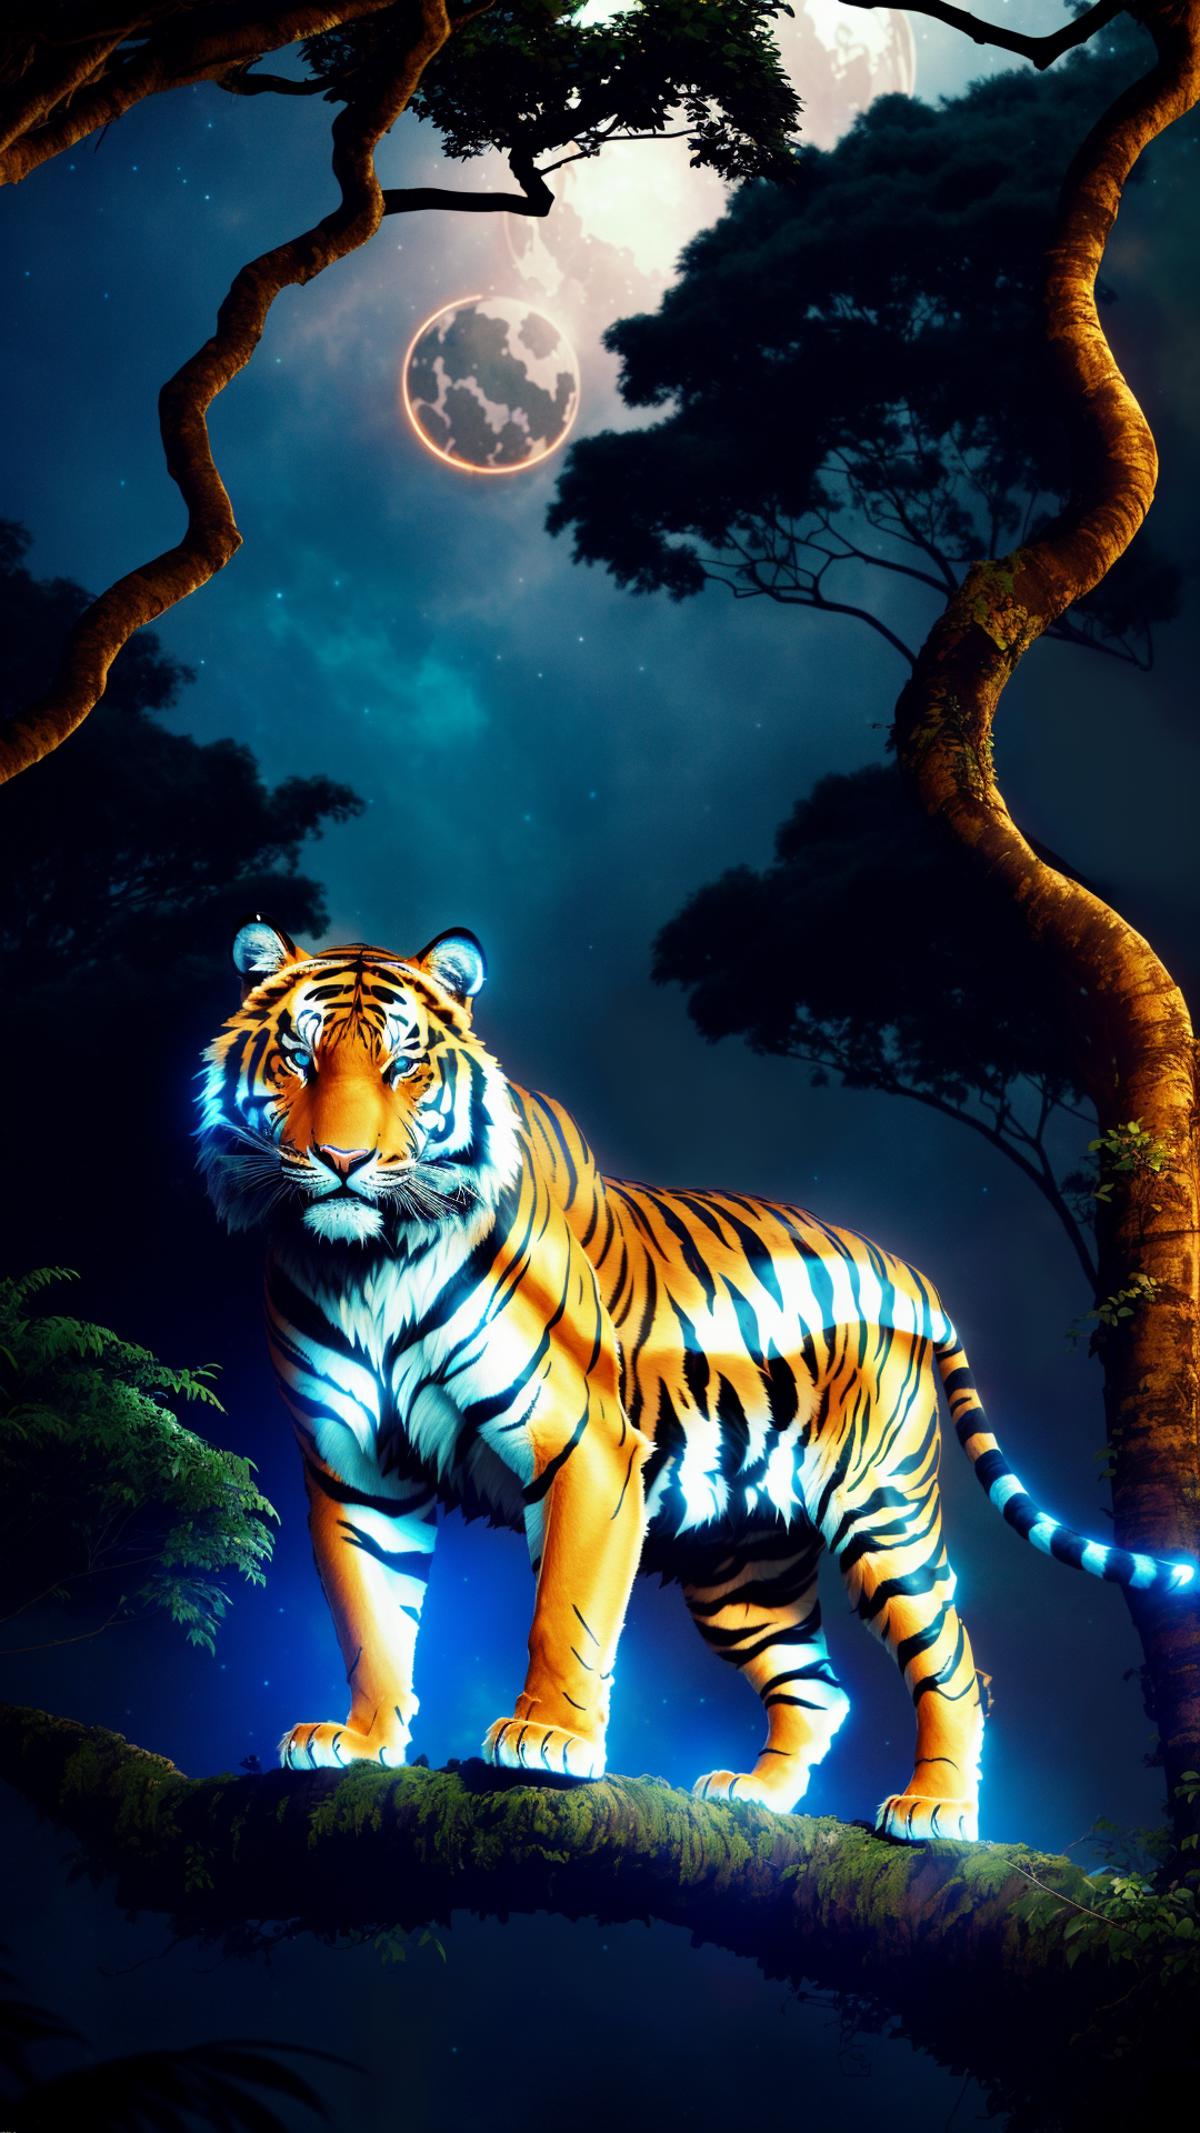 A brightly lit tiger in a forest at night.